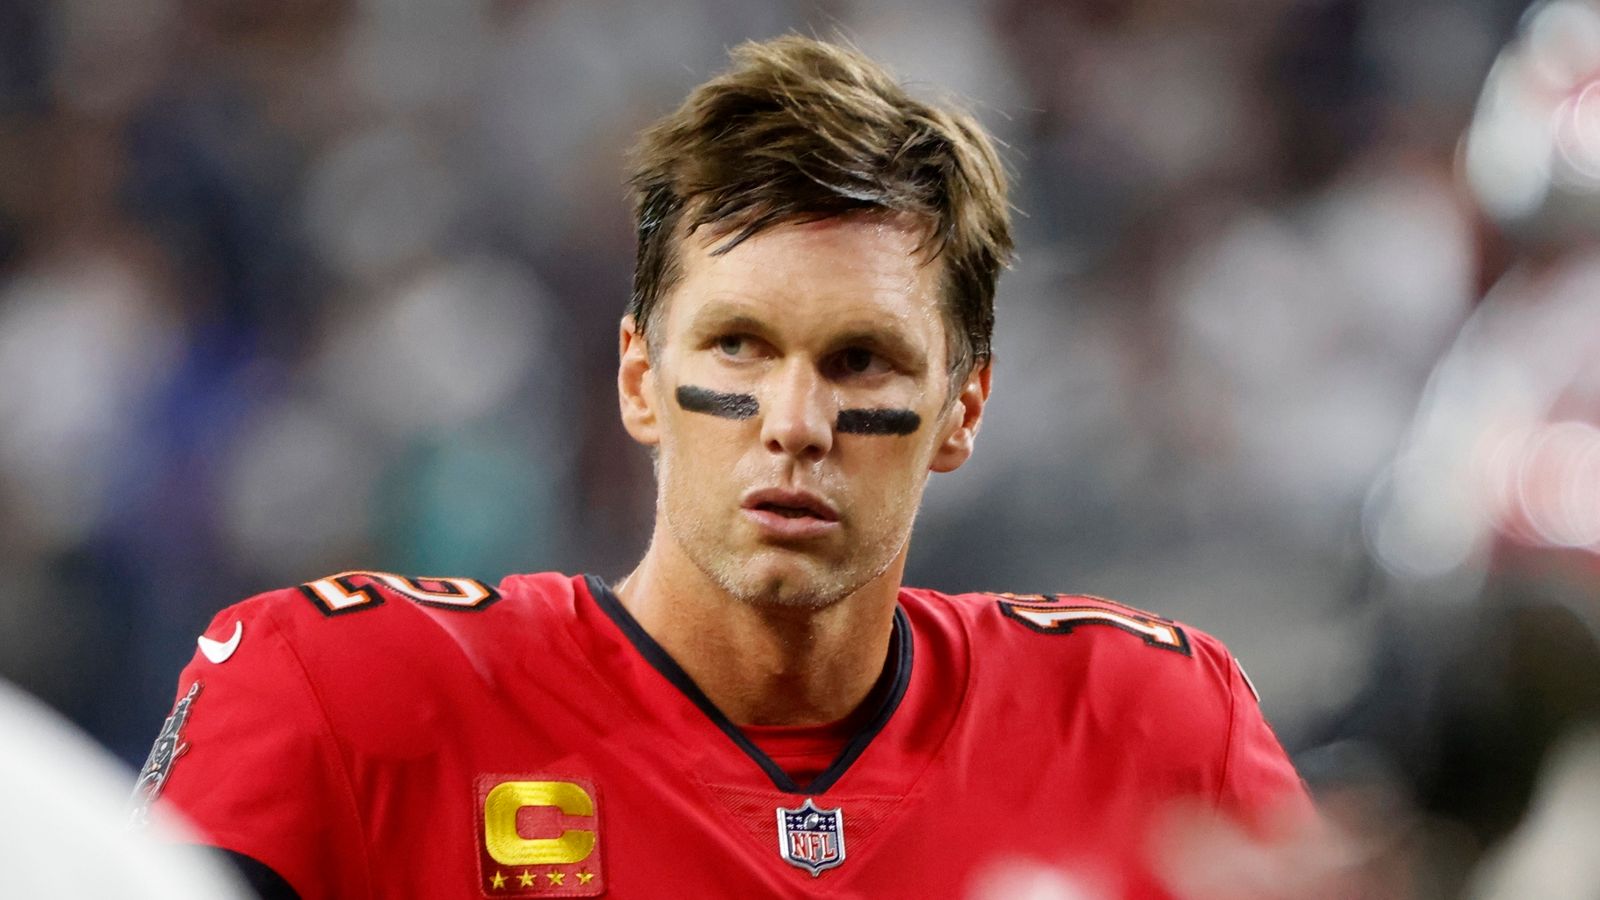 Tom Brady: Tampa Bay Buccaneers quarterback’s ‘last’ touchdown ball sells at auction for 9k